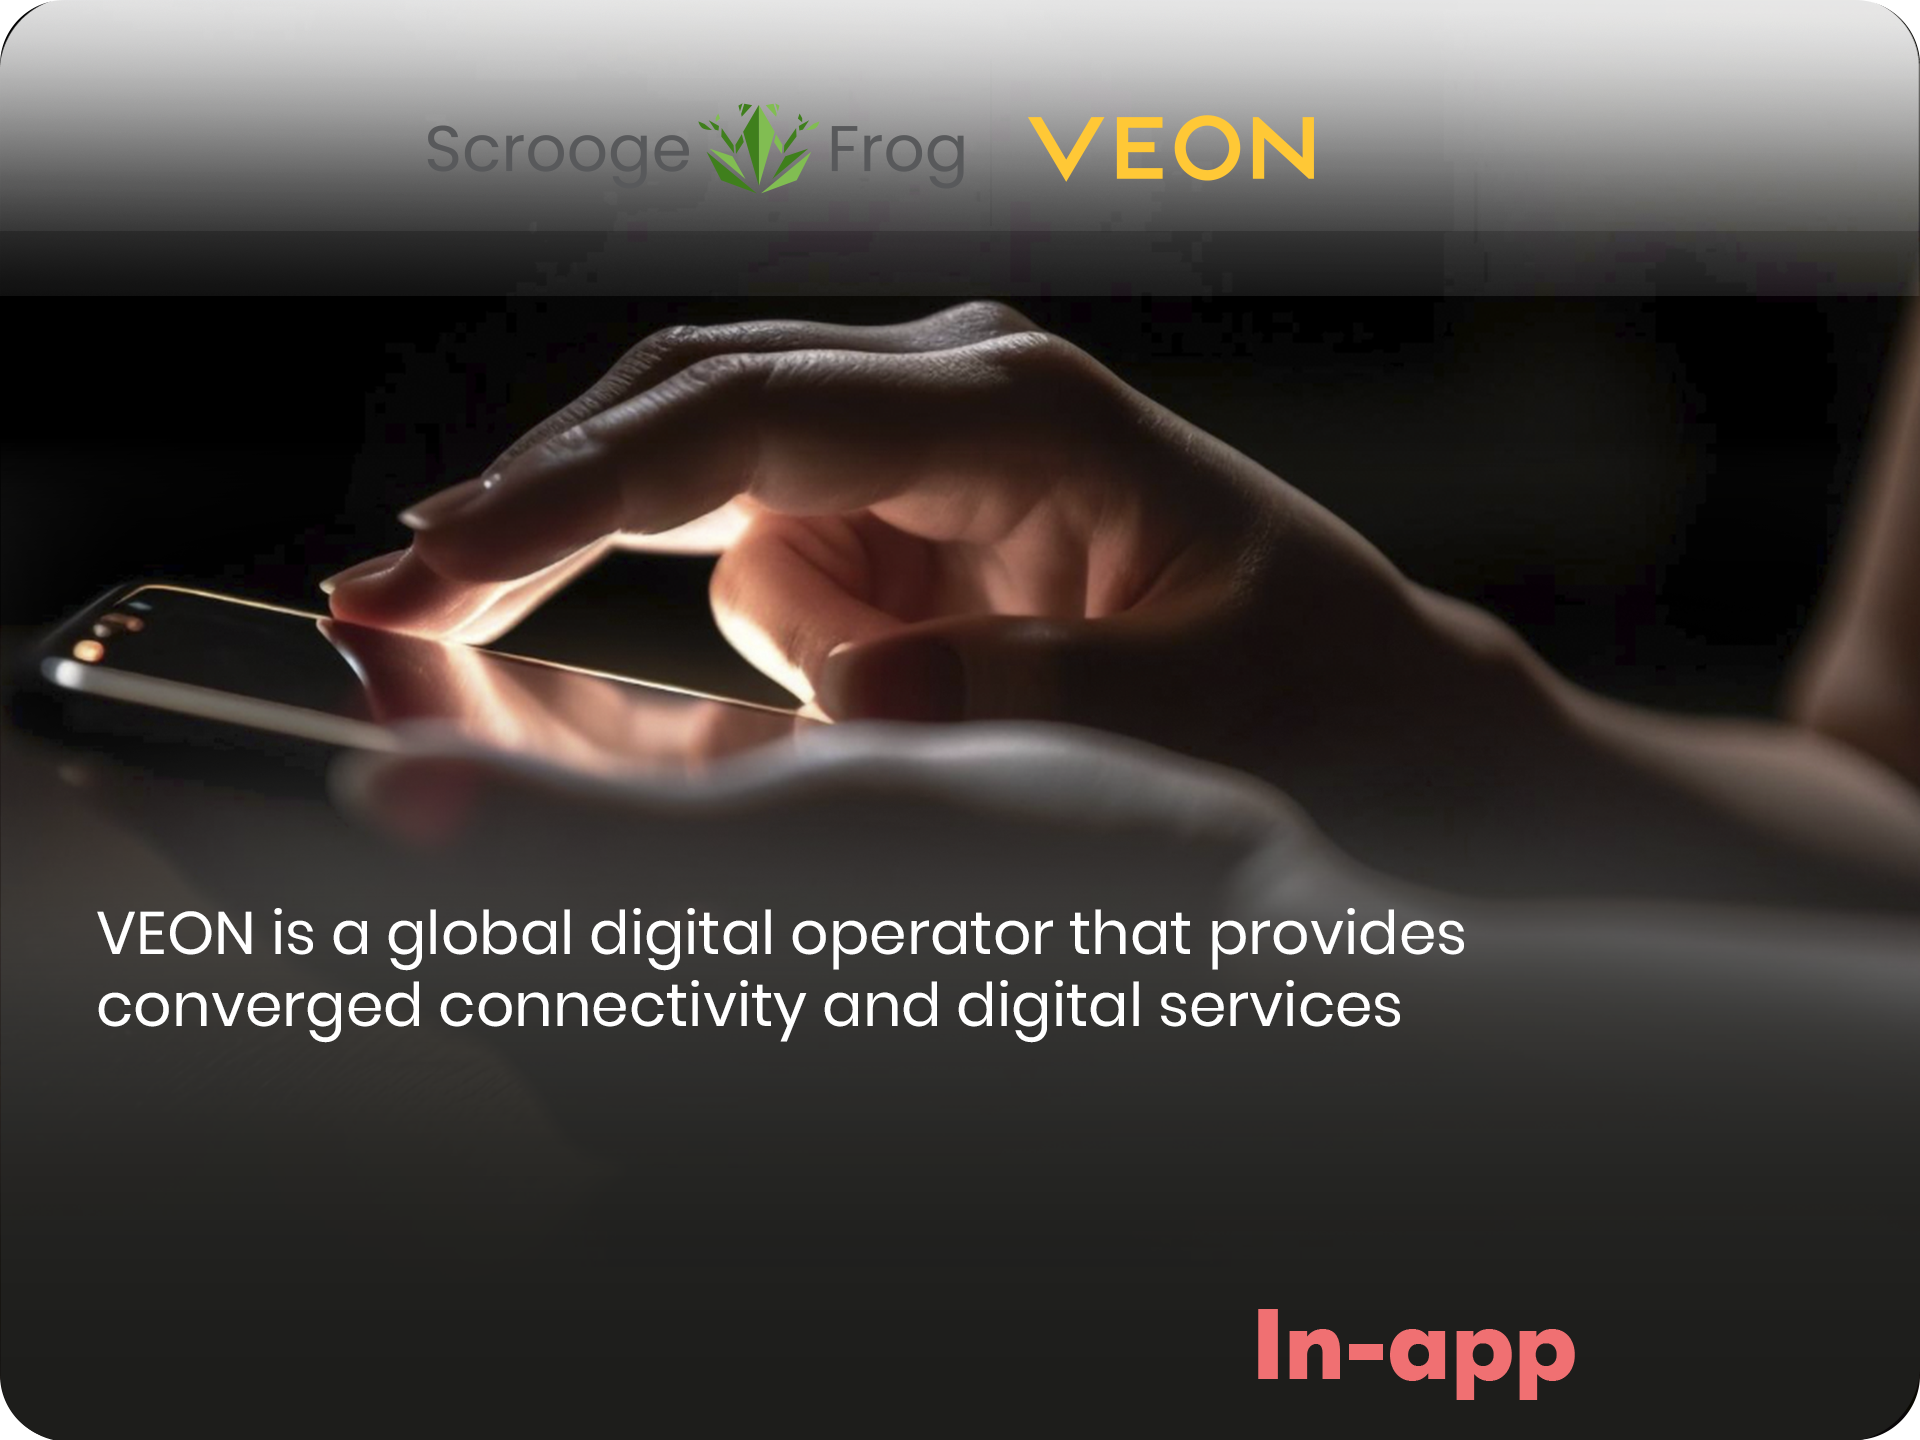 VEON is a global digital operator that provides converged connectivity and digital services